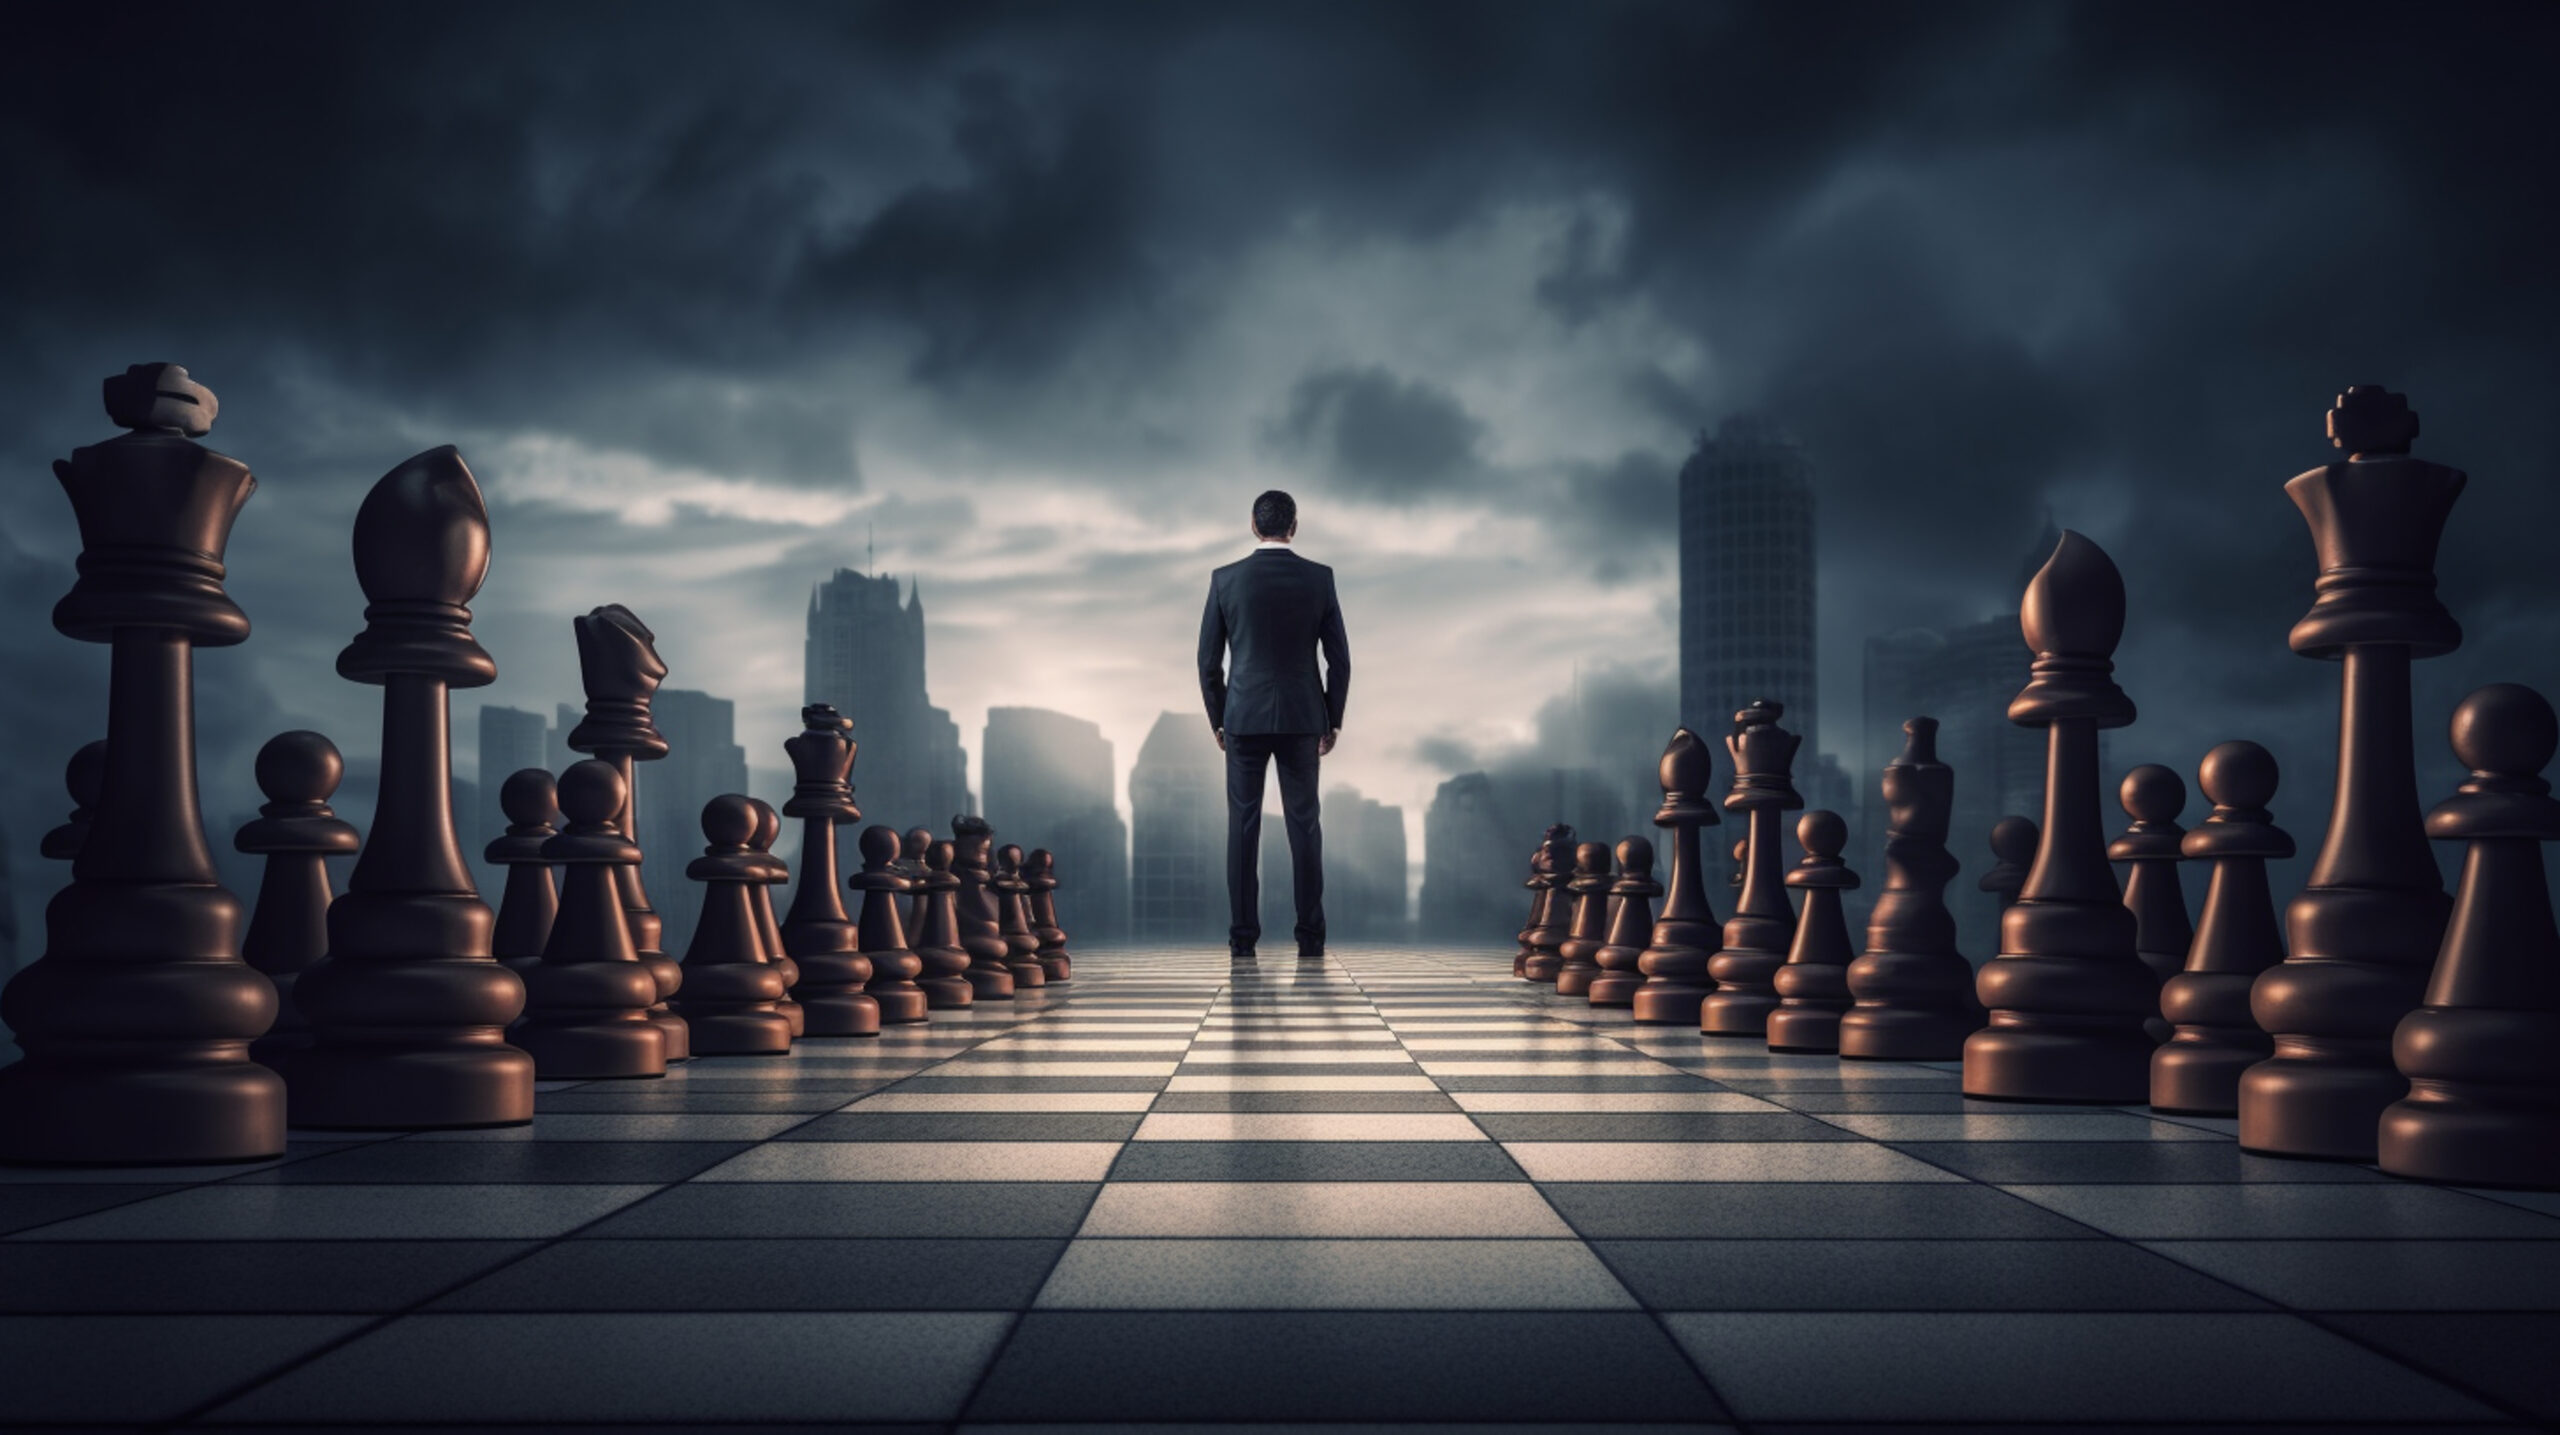 man-stands-chess-board-with-city-background